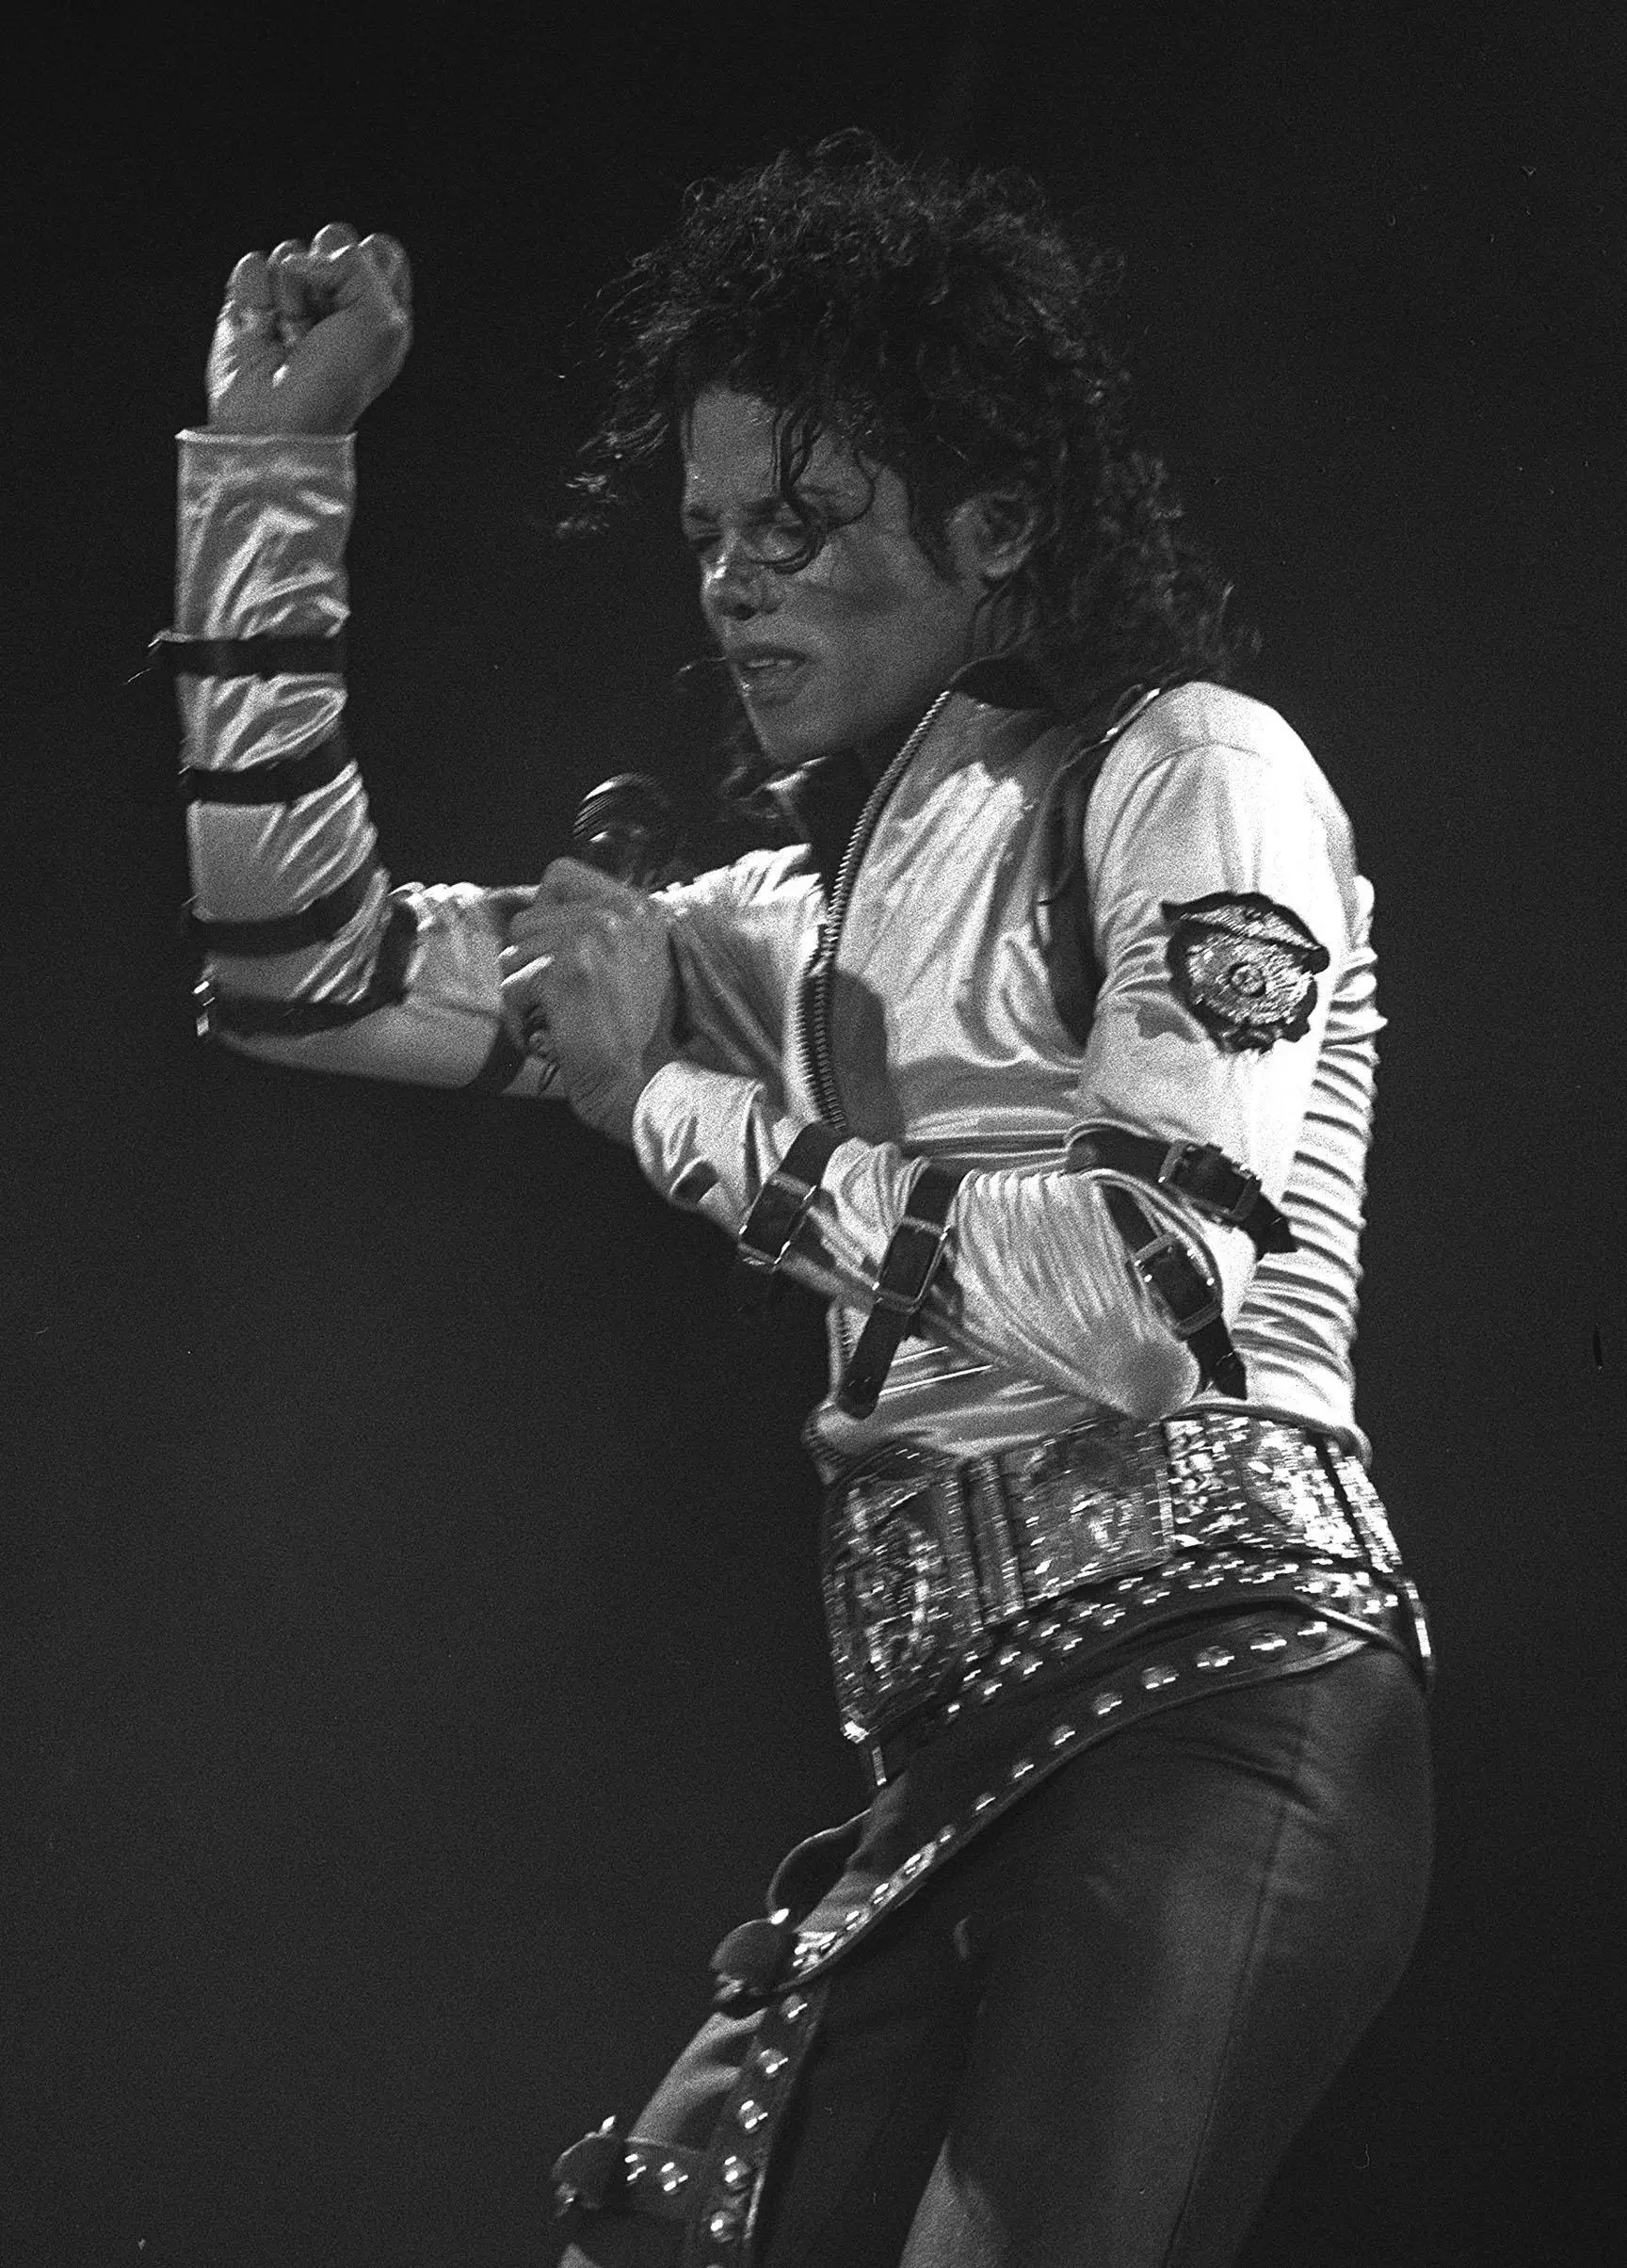 Michael Jackson was famous for his moonwalk.